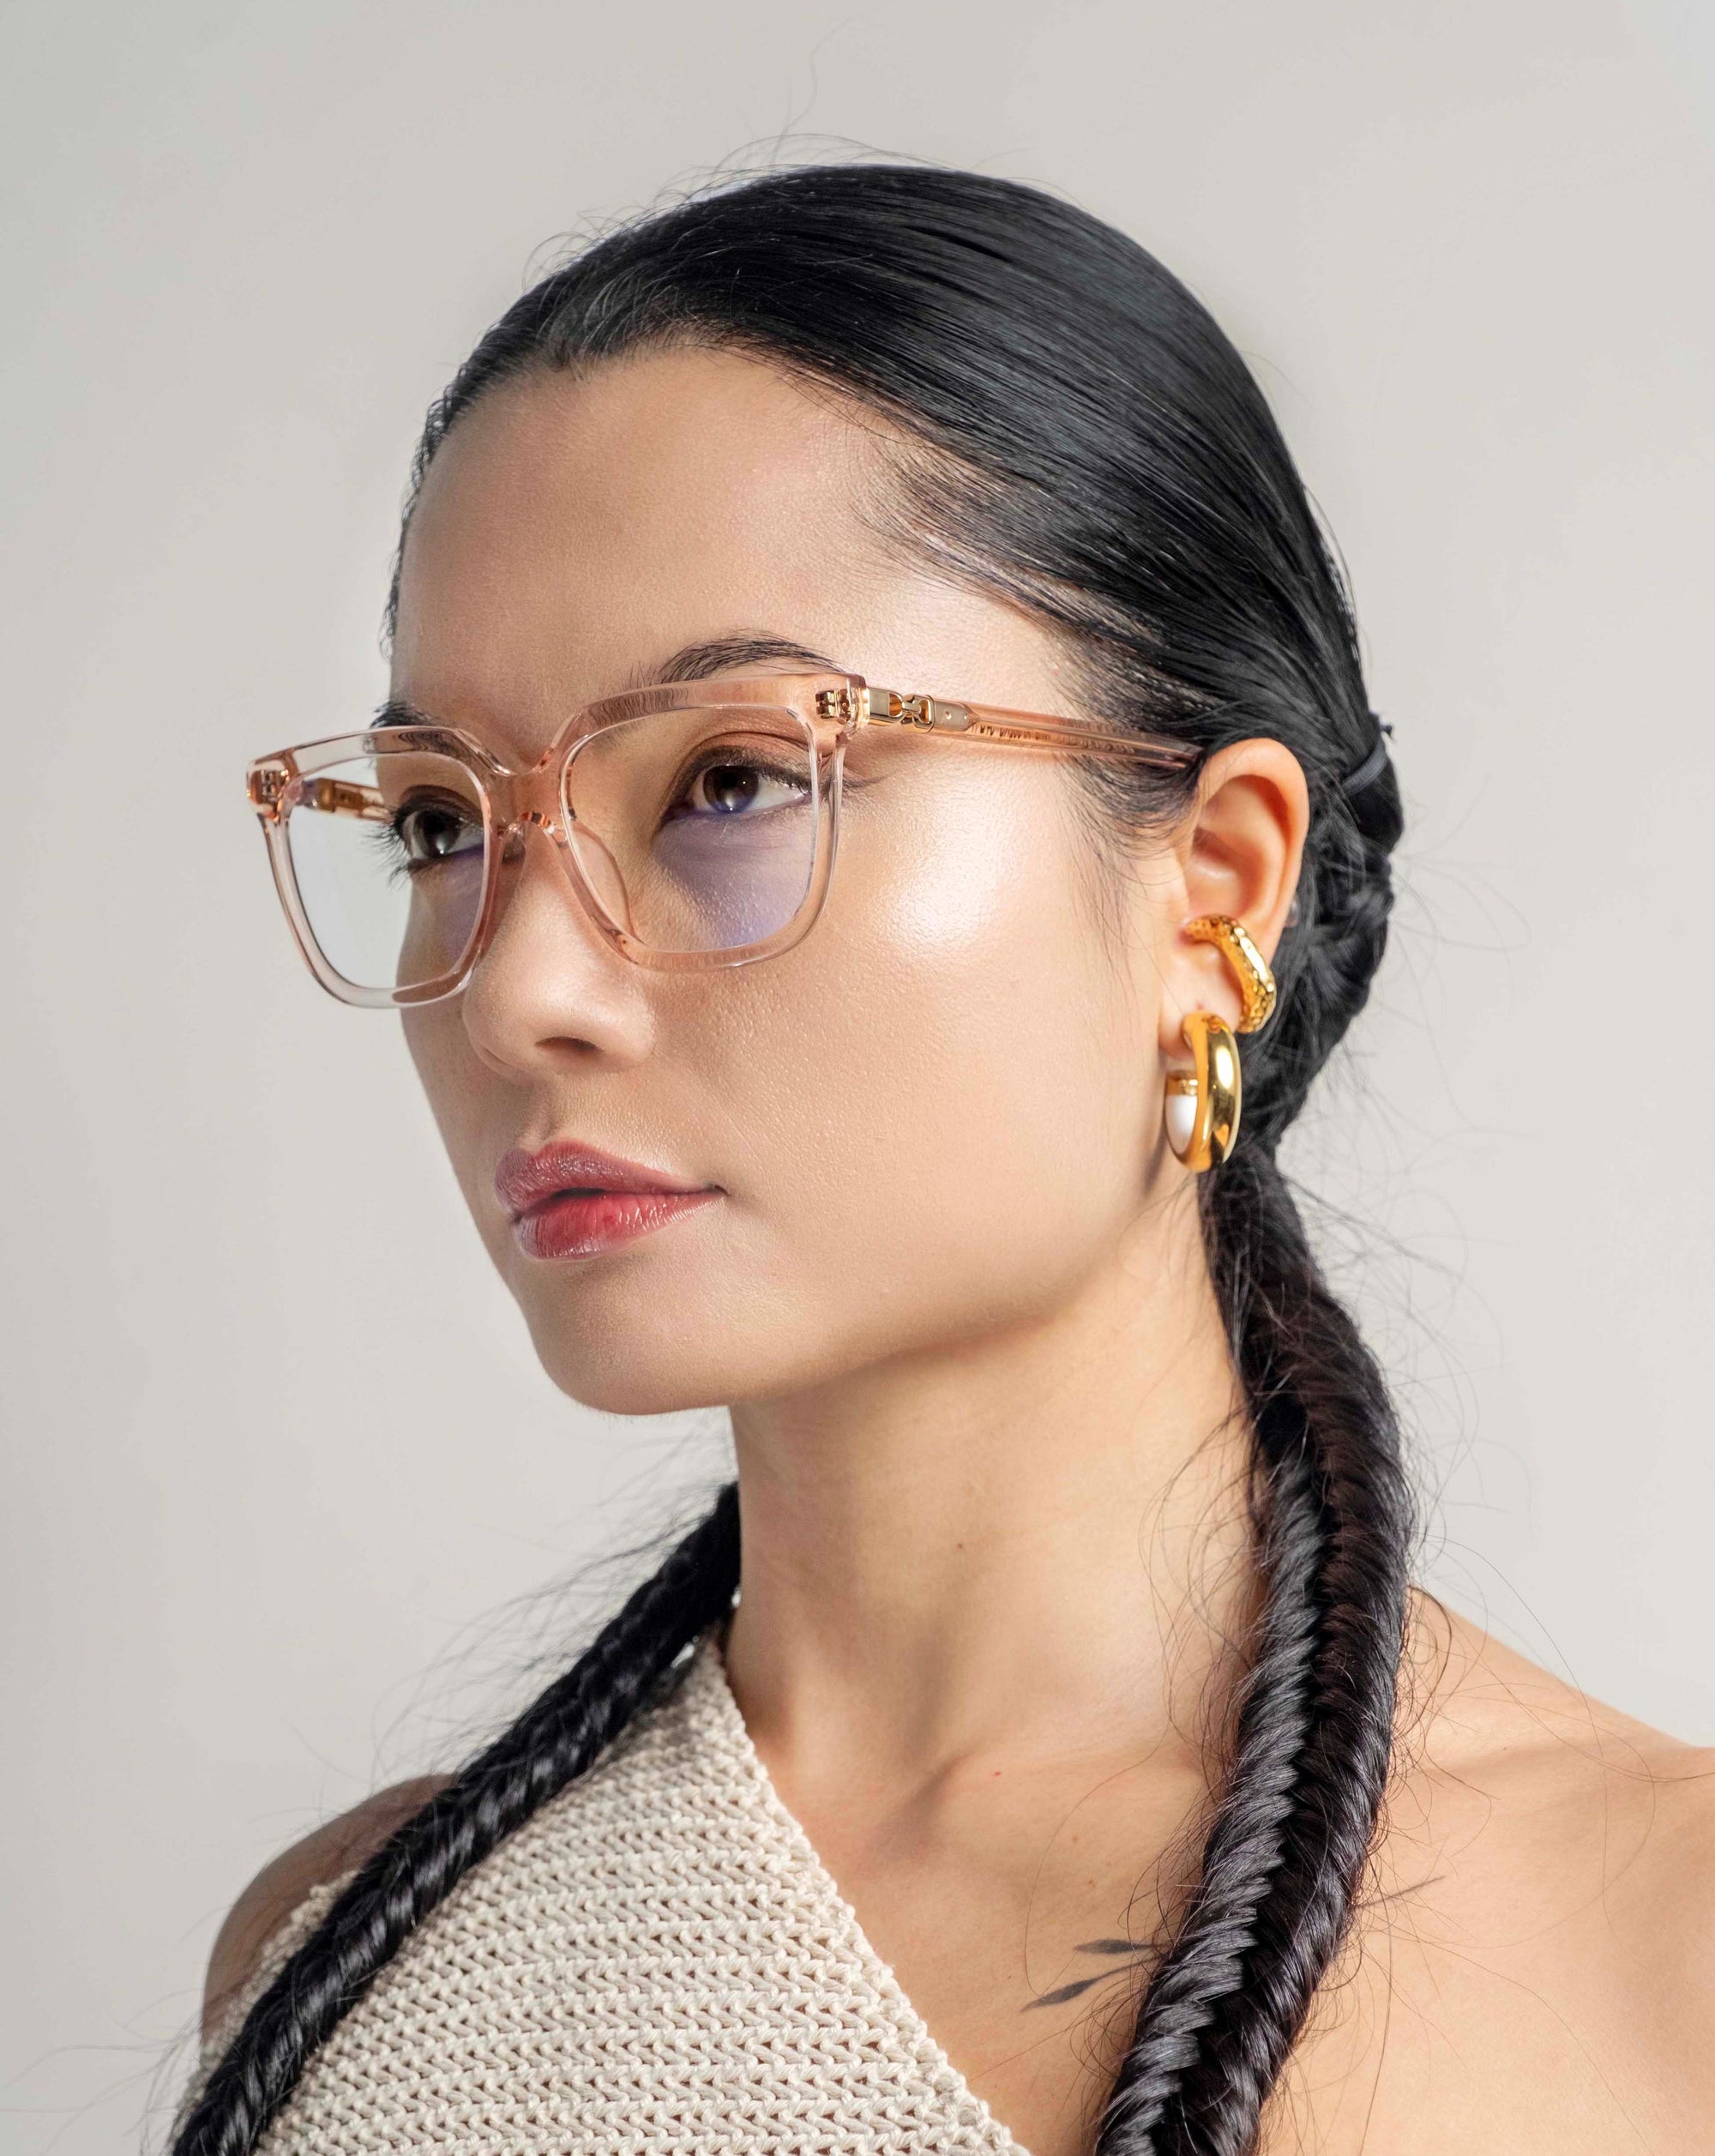 A woman with long, braided hair is seen wearing For Art&#39;s Sake® Nina transparent eyeglasses in a classic square silhouette and 18-karat gold hoop earrings. She is dressed in a textured off-white one-shoulder top and is looking slightly to her right against a plain background. The overall mood is stylish and poised.